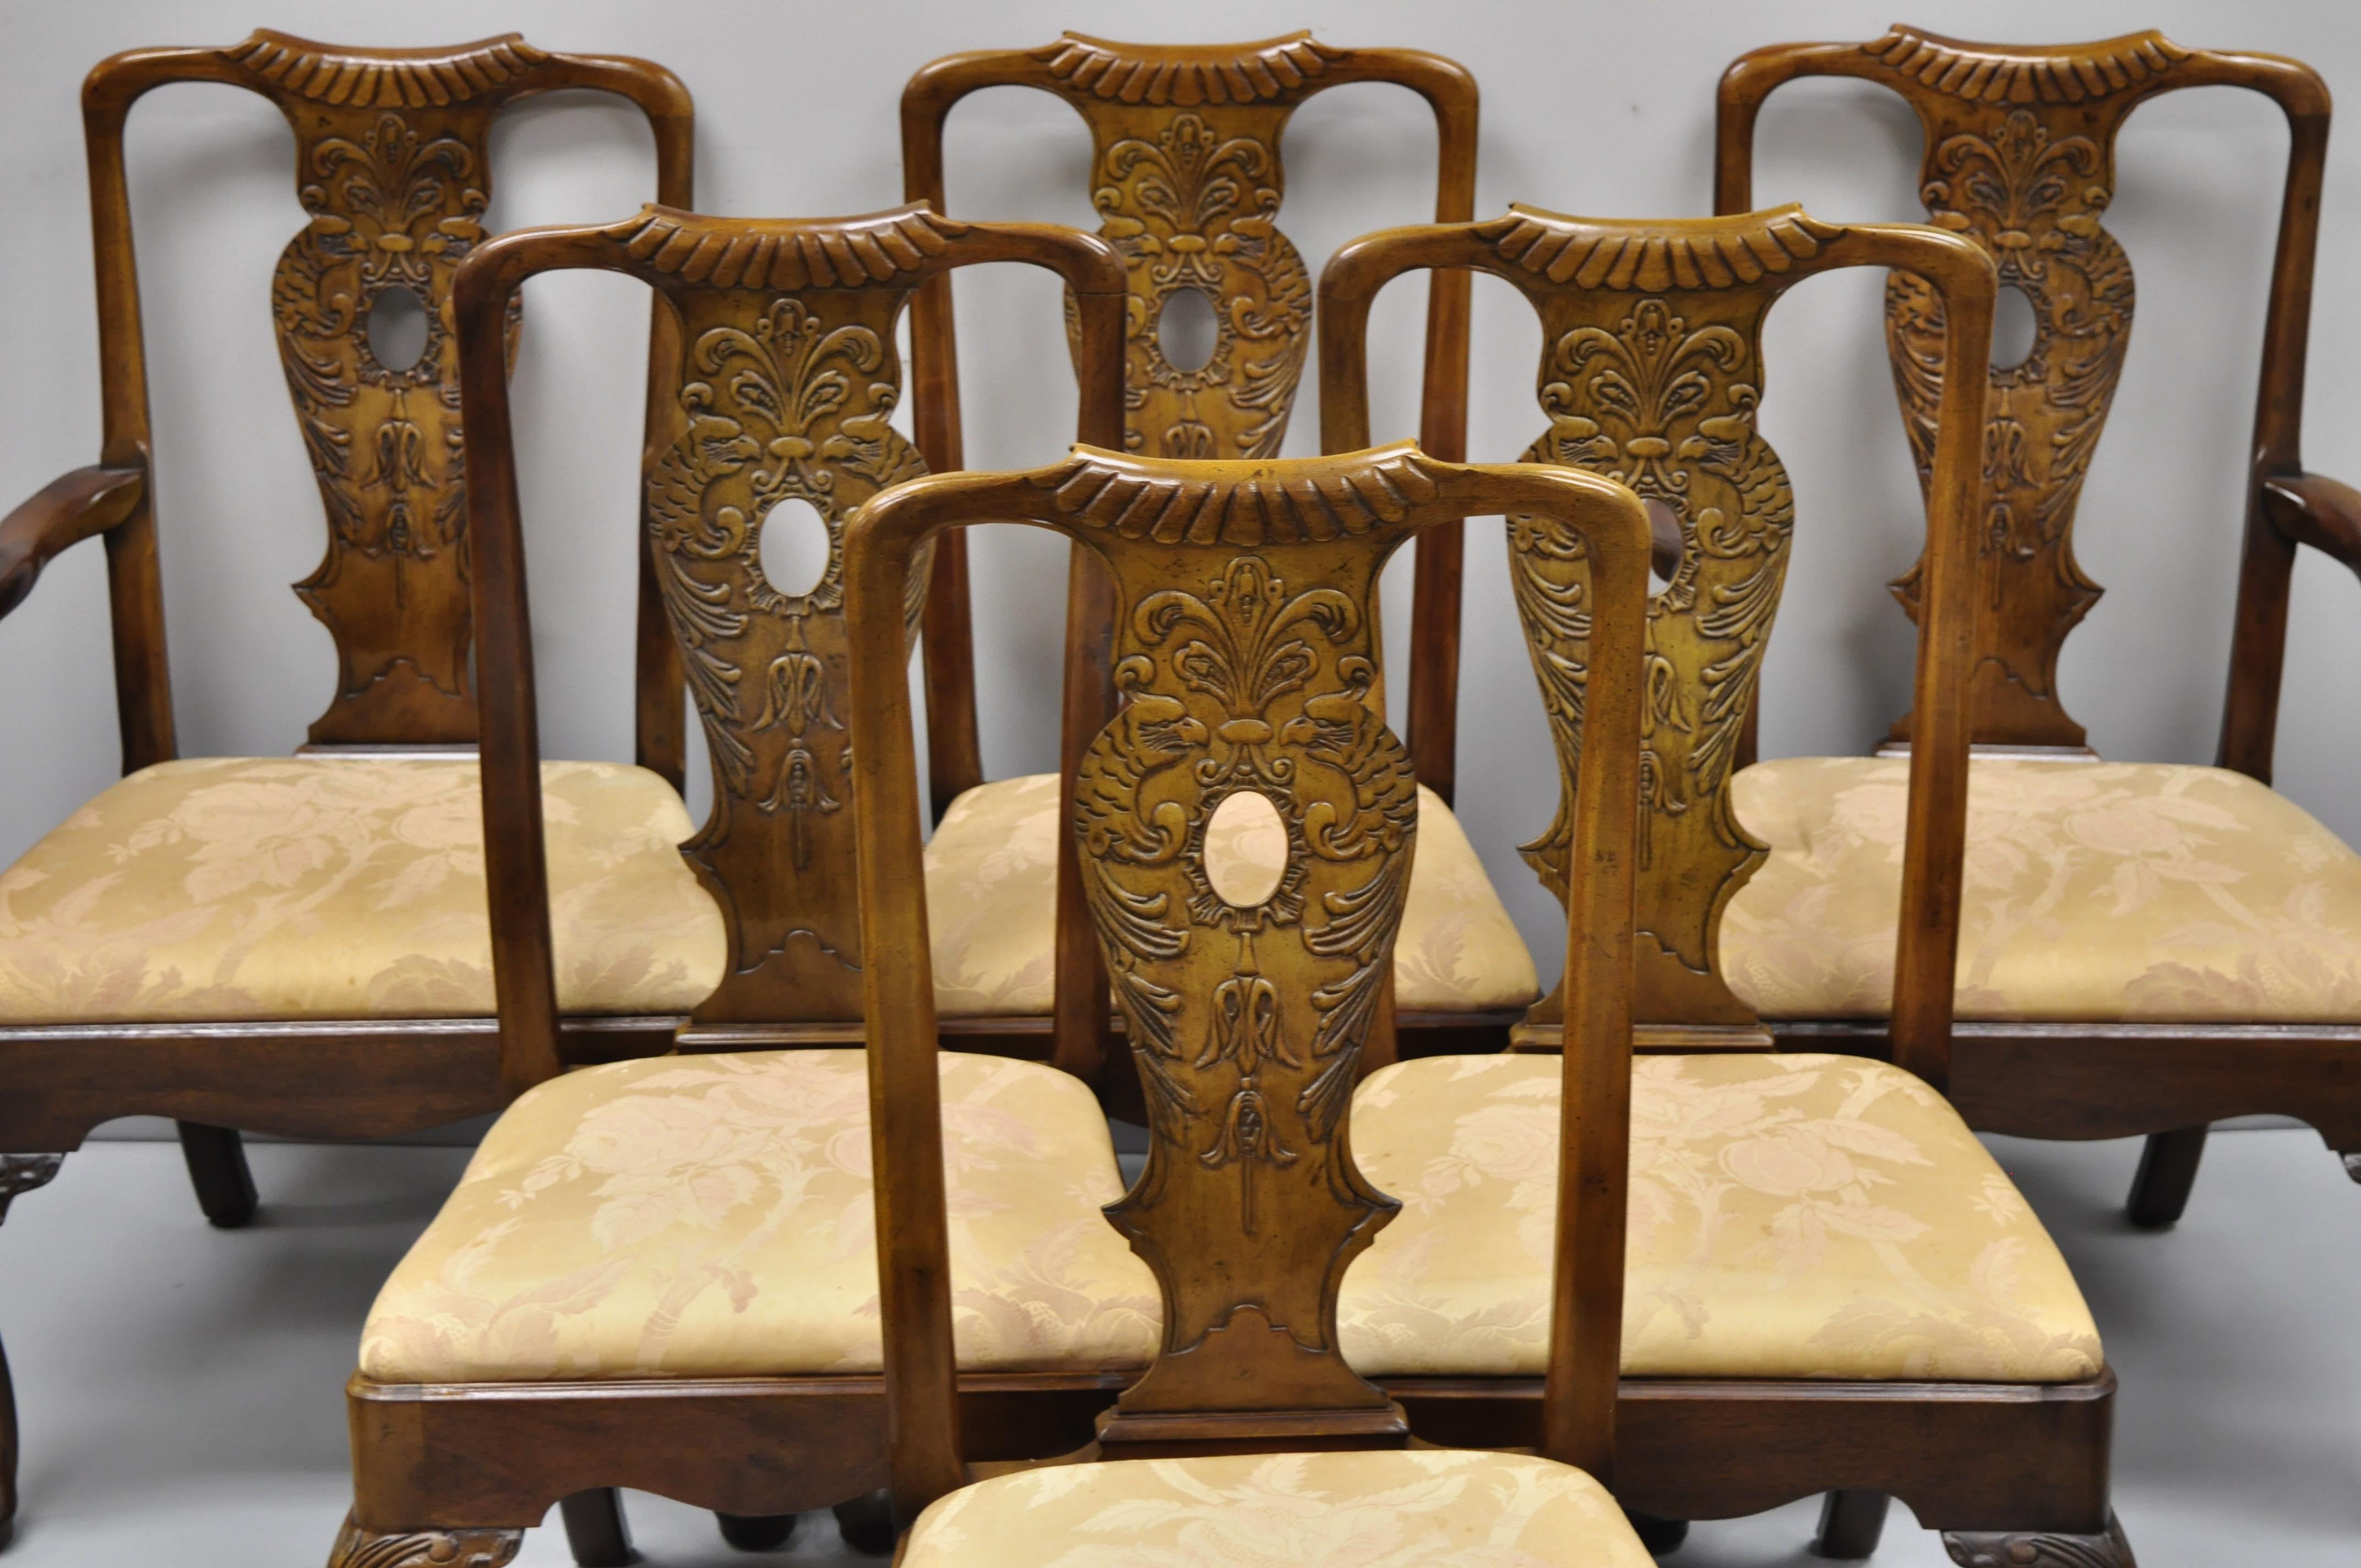 6 Henredon Aston court carved wood oriental dining room chairs with birds. Listing includes (2) armchairs, (4) side chairs, bird carved back splats, Queen Anne legs, carved knees, distressed finish, stretcher base, solid wood construction, nicely